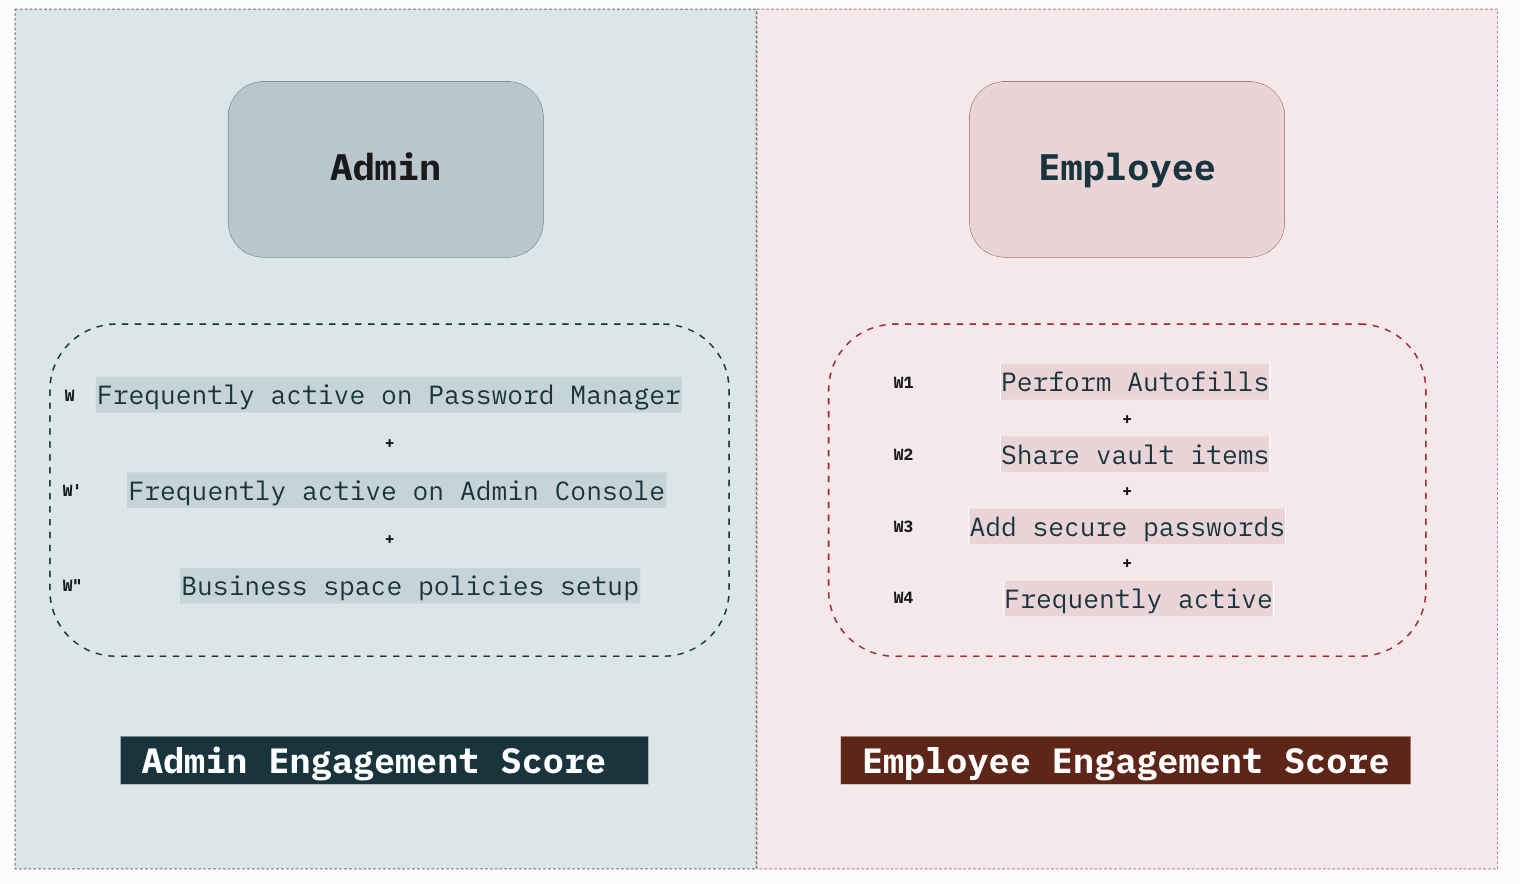 A chart divided into two halves. The left half is labeled “Admin Engagement Score,” and the right half is labeled “Employee Engagement Score.” Under “Admin,” there are three bullet points: “Frequently active on Password Manager.” “Frequently active on Admin Console,”and “Business space policies setup.” Under “Employee,” there are four bullet points: “Perform Autofills.” “Share vault items.” “Add secure passwords,”and “Frequently active.” 